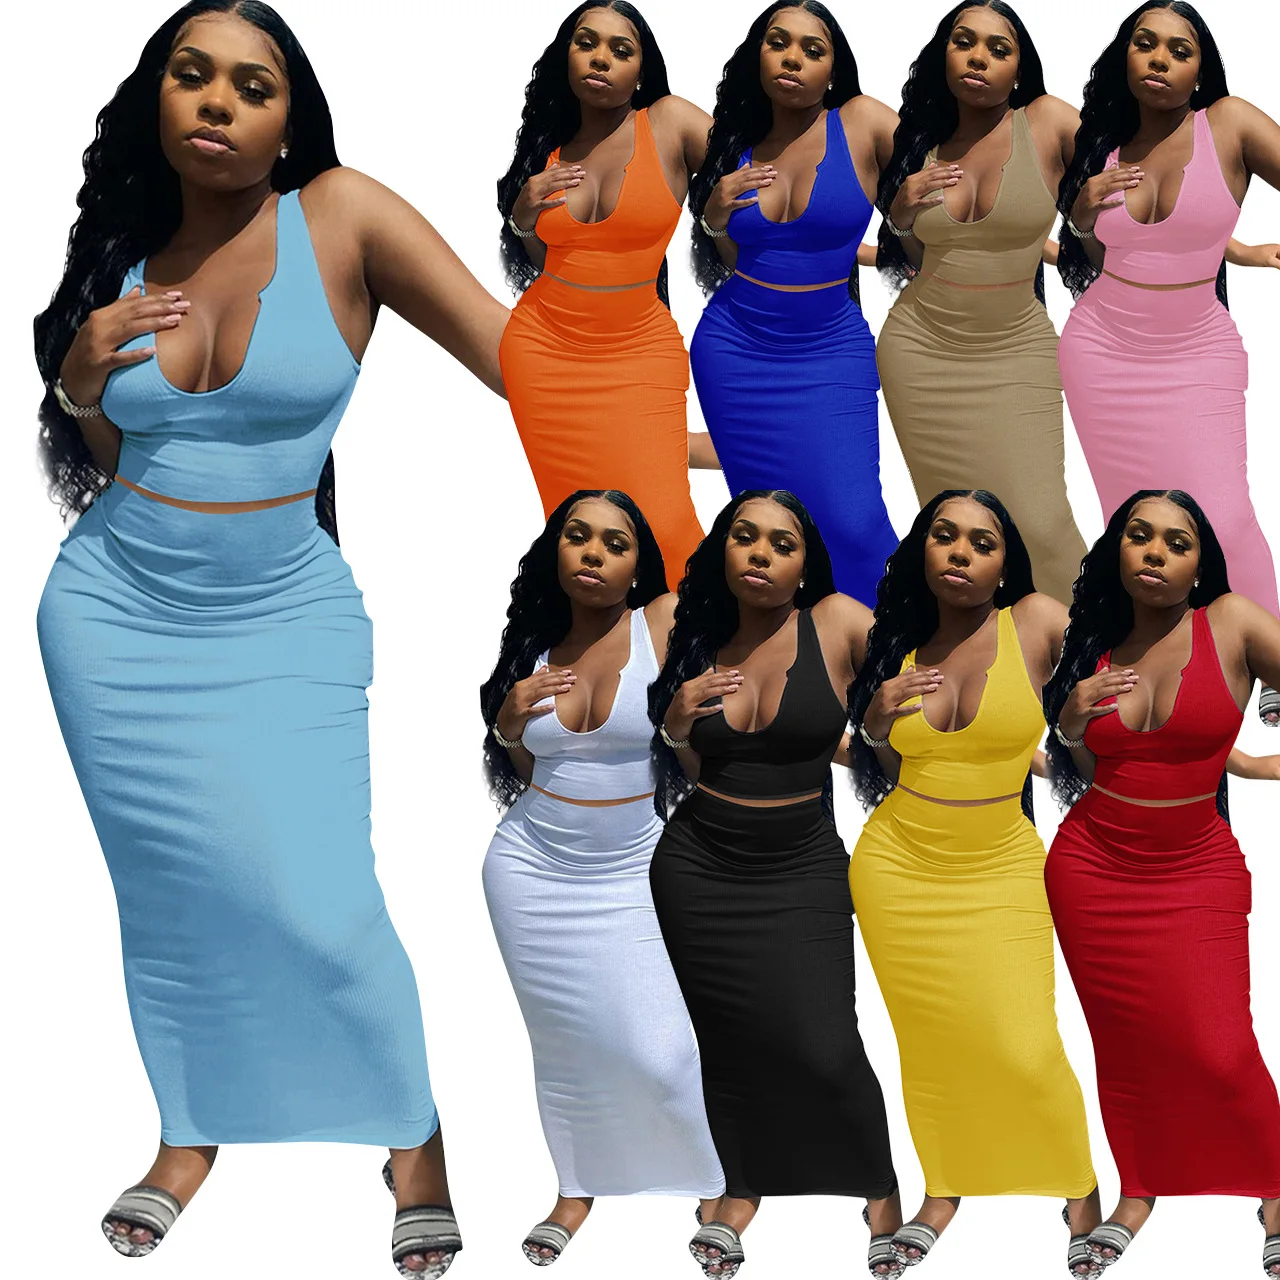 

Wholesale 2021 Summer Women Sexy Dress V-neck Vest Long Skirt Matching Set Sleeveless Rib Knitted Two Piece Bodycon Dress, White pink yellow orange red black sky-blue brown blue